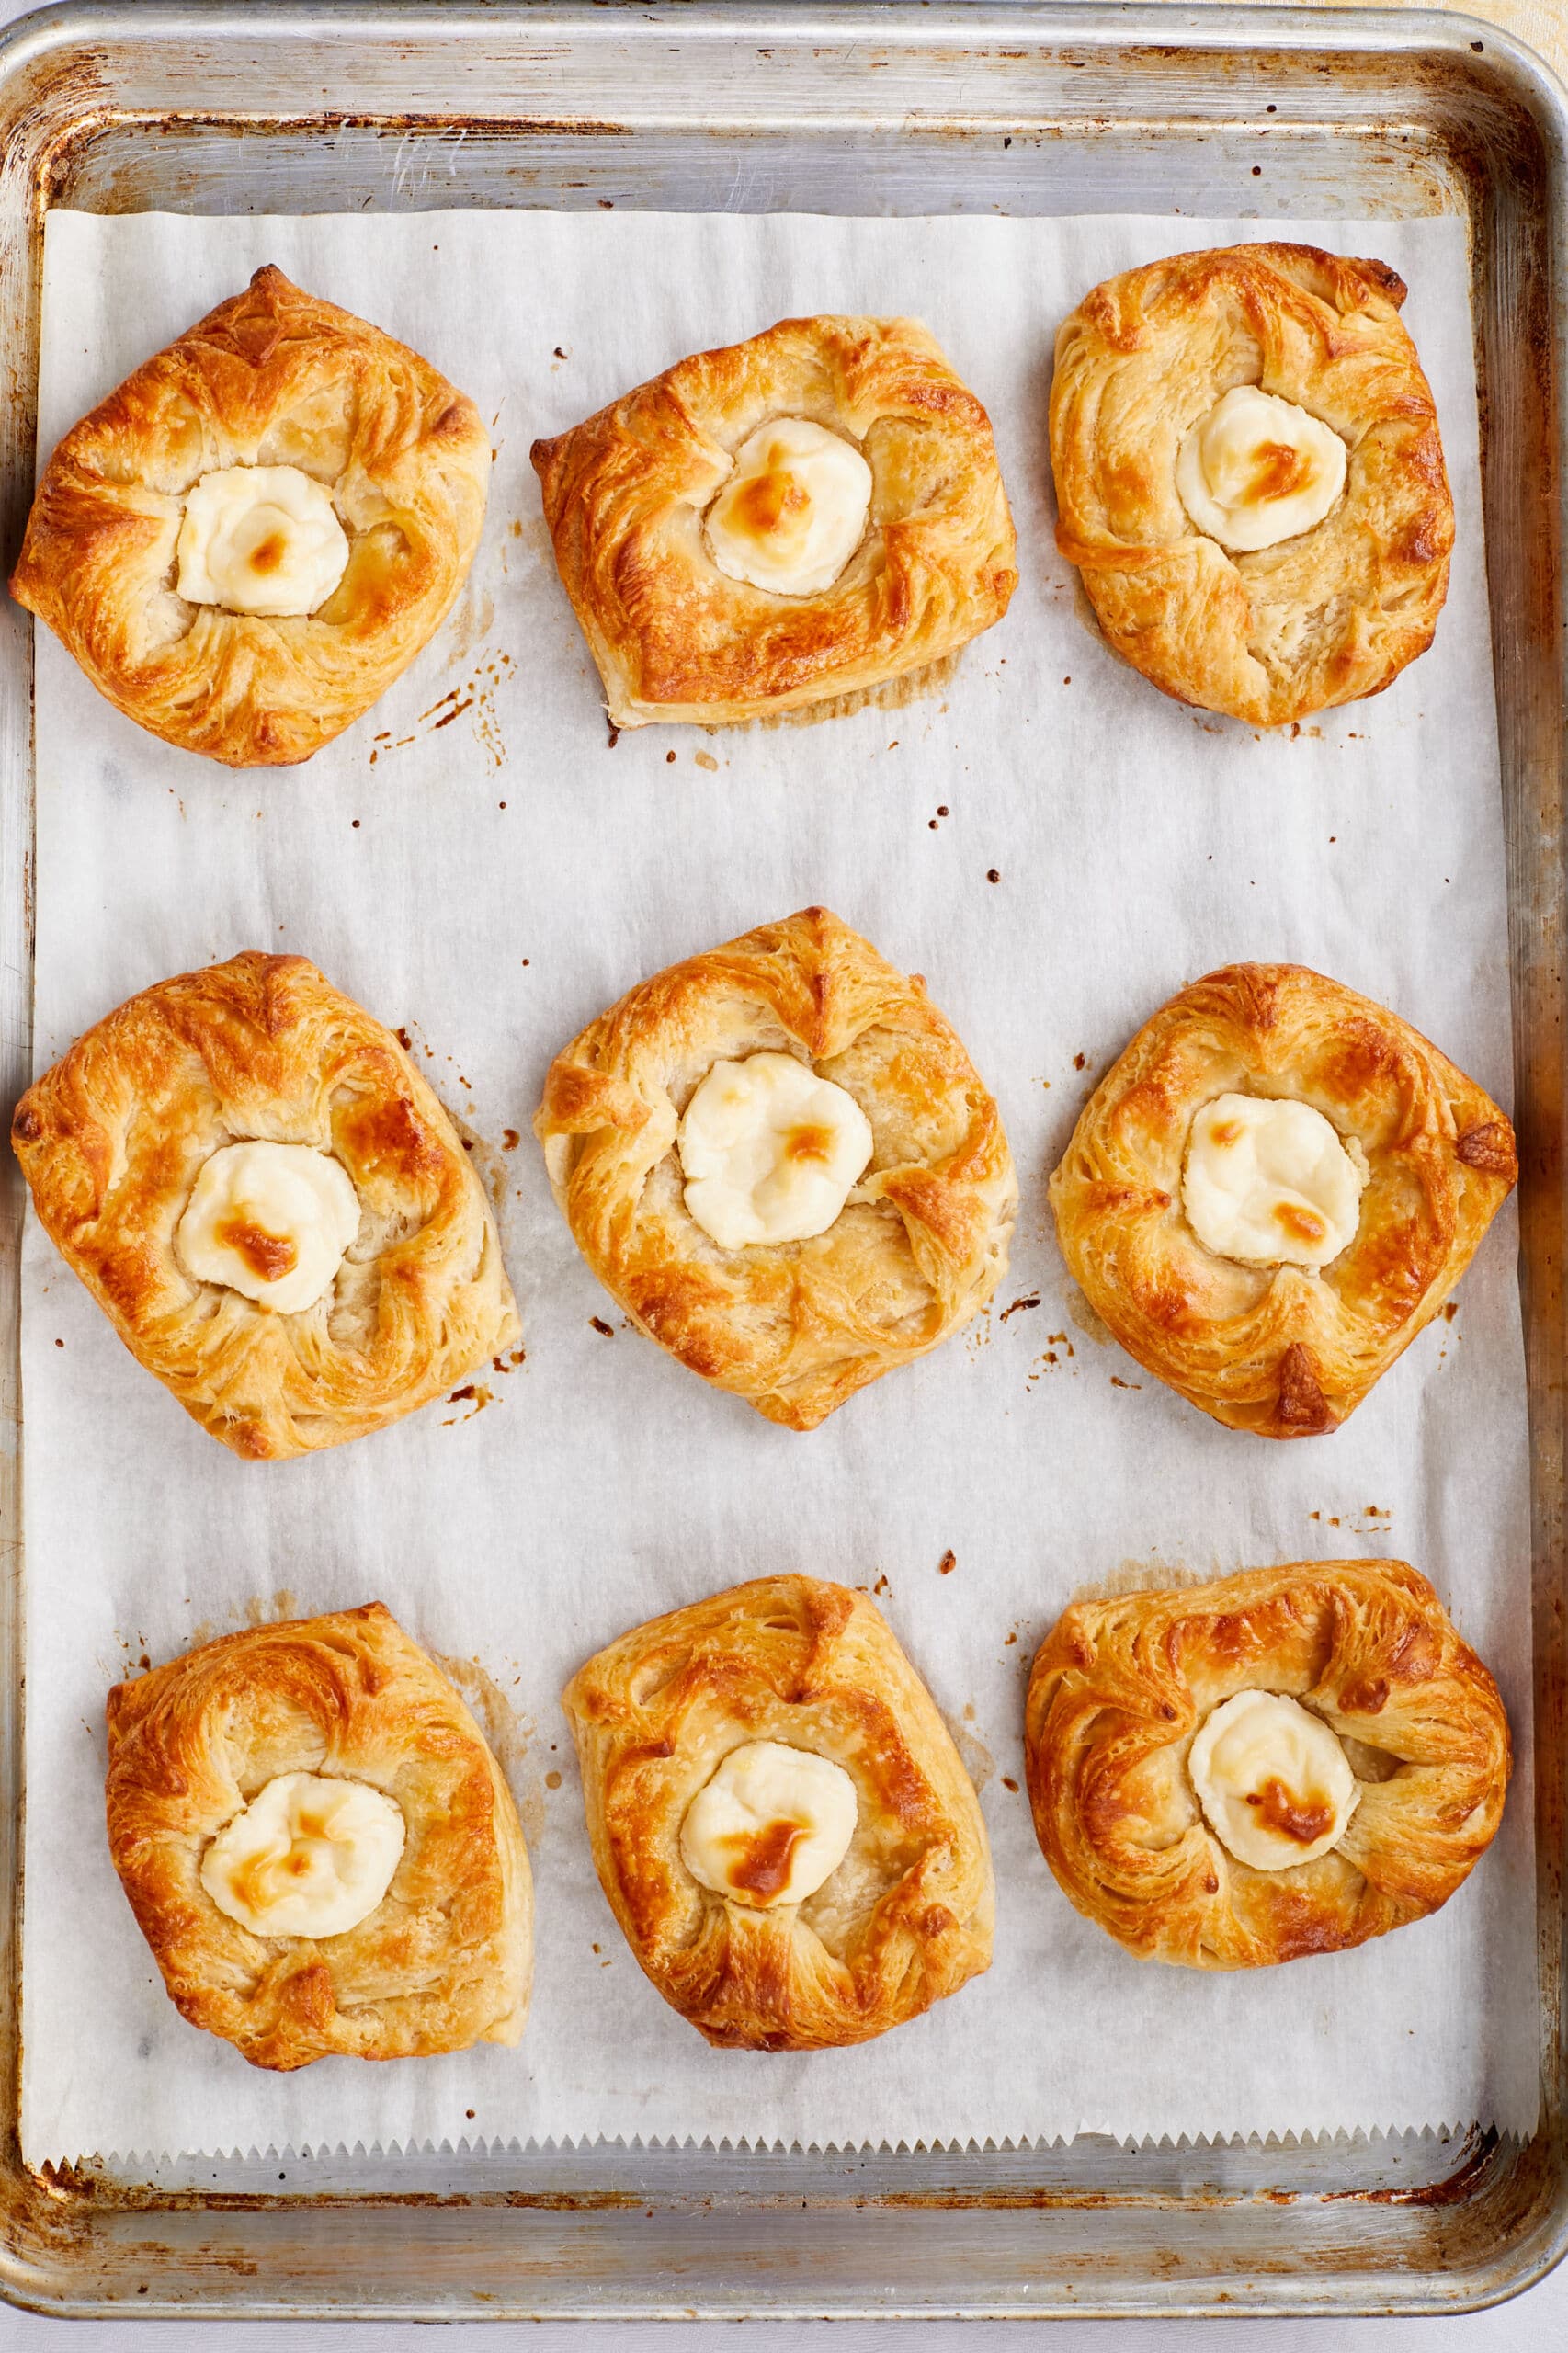 The Cheese Danish are baked until golden brown.